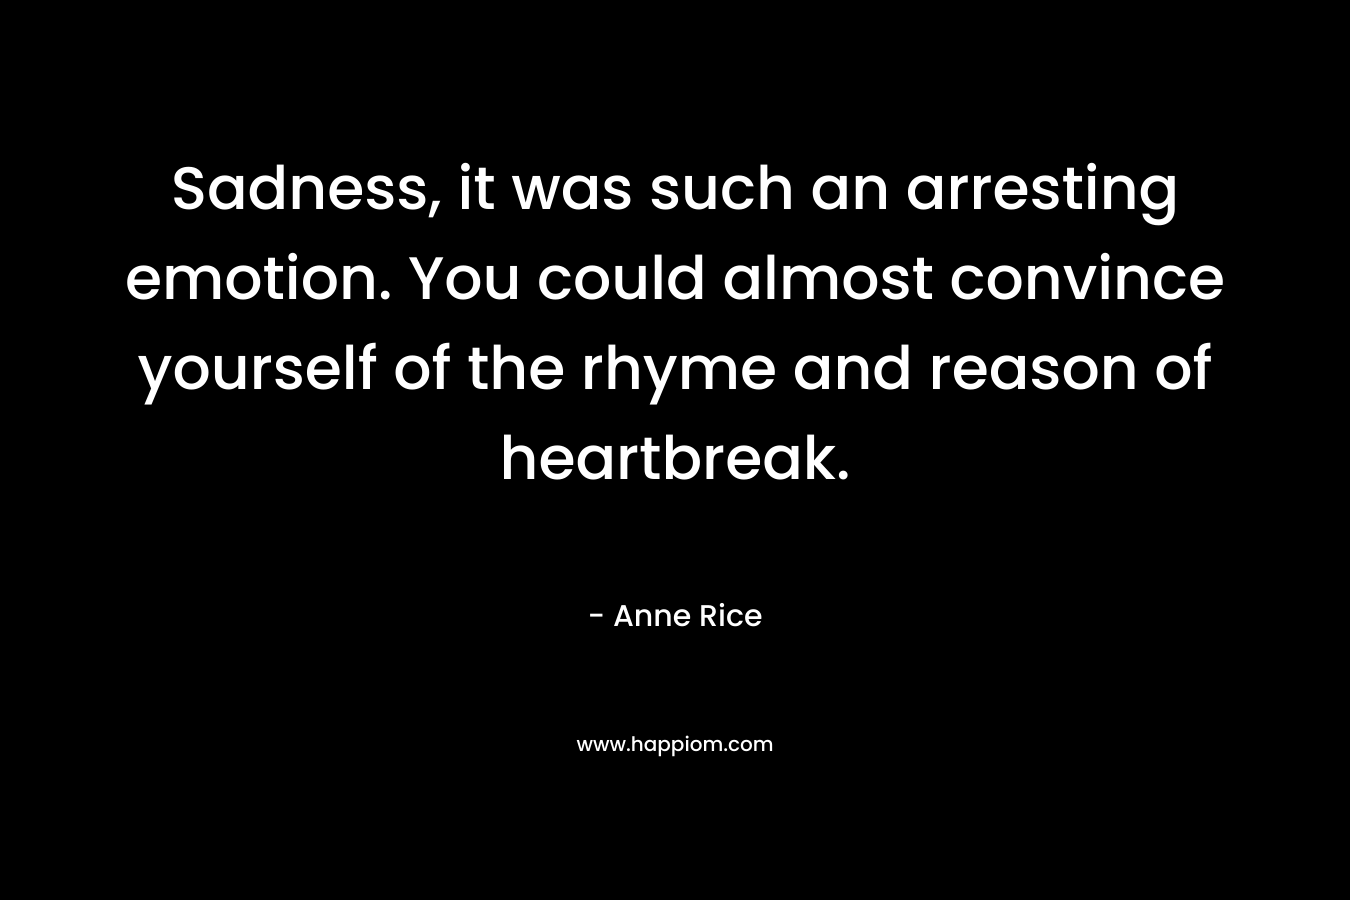 Sadness, it was such an arresting emotion. You could almost convince yourself of the rhyme and reason of heartbreak. – Anne Rice